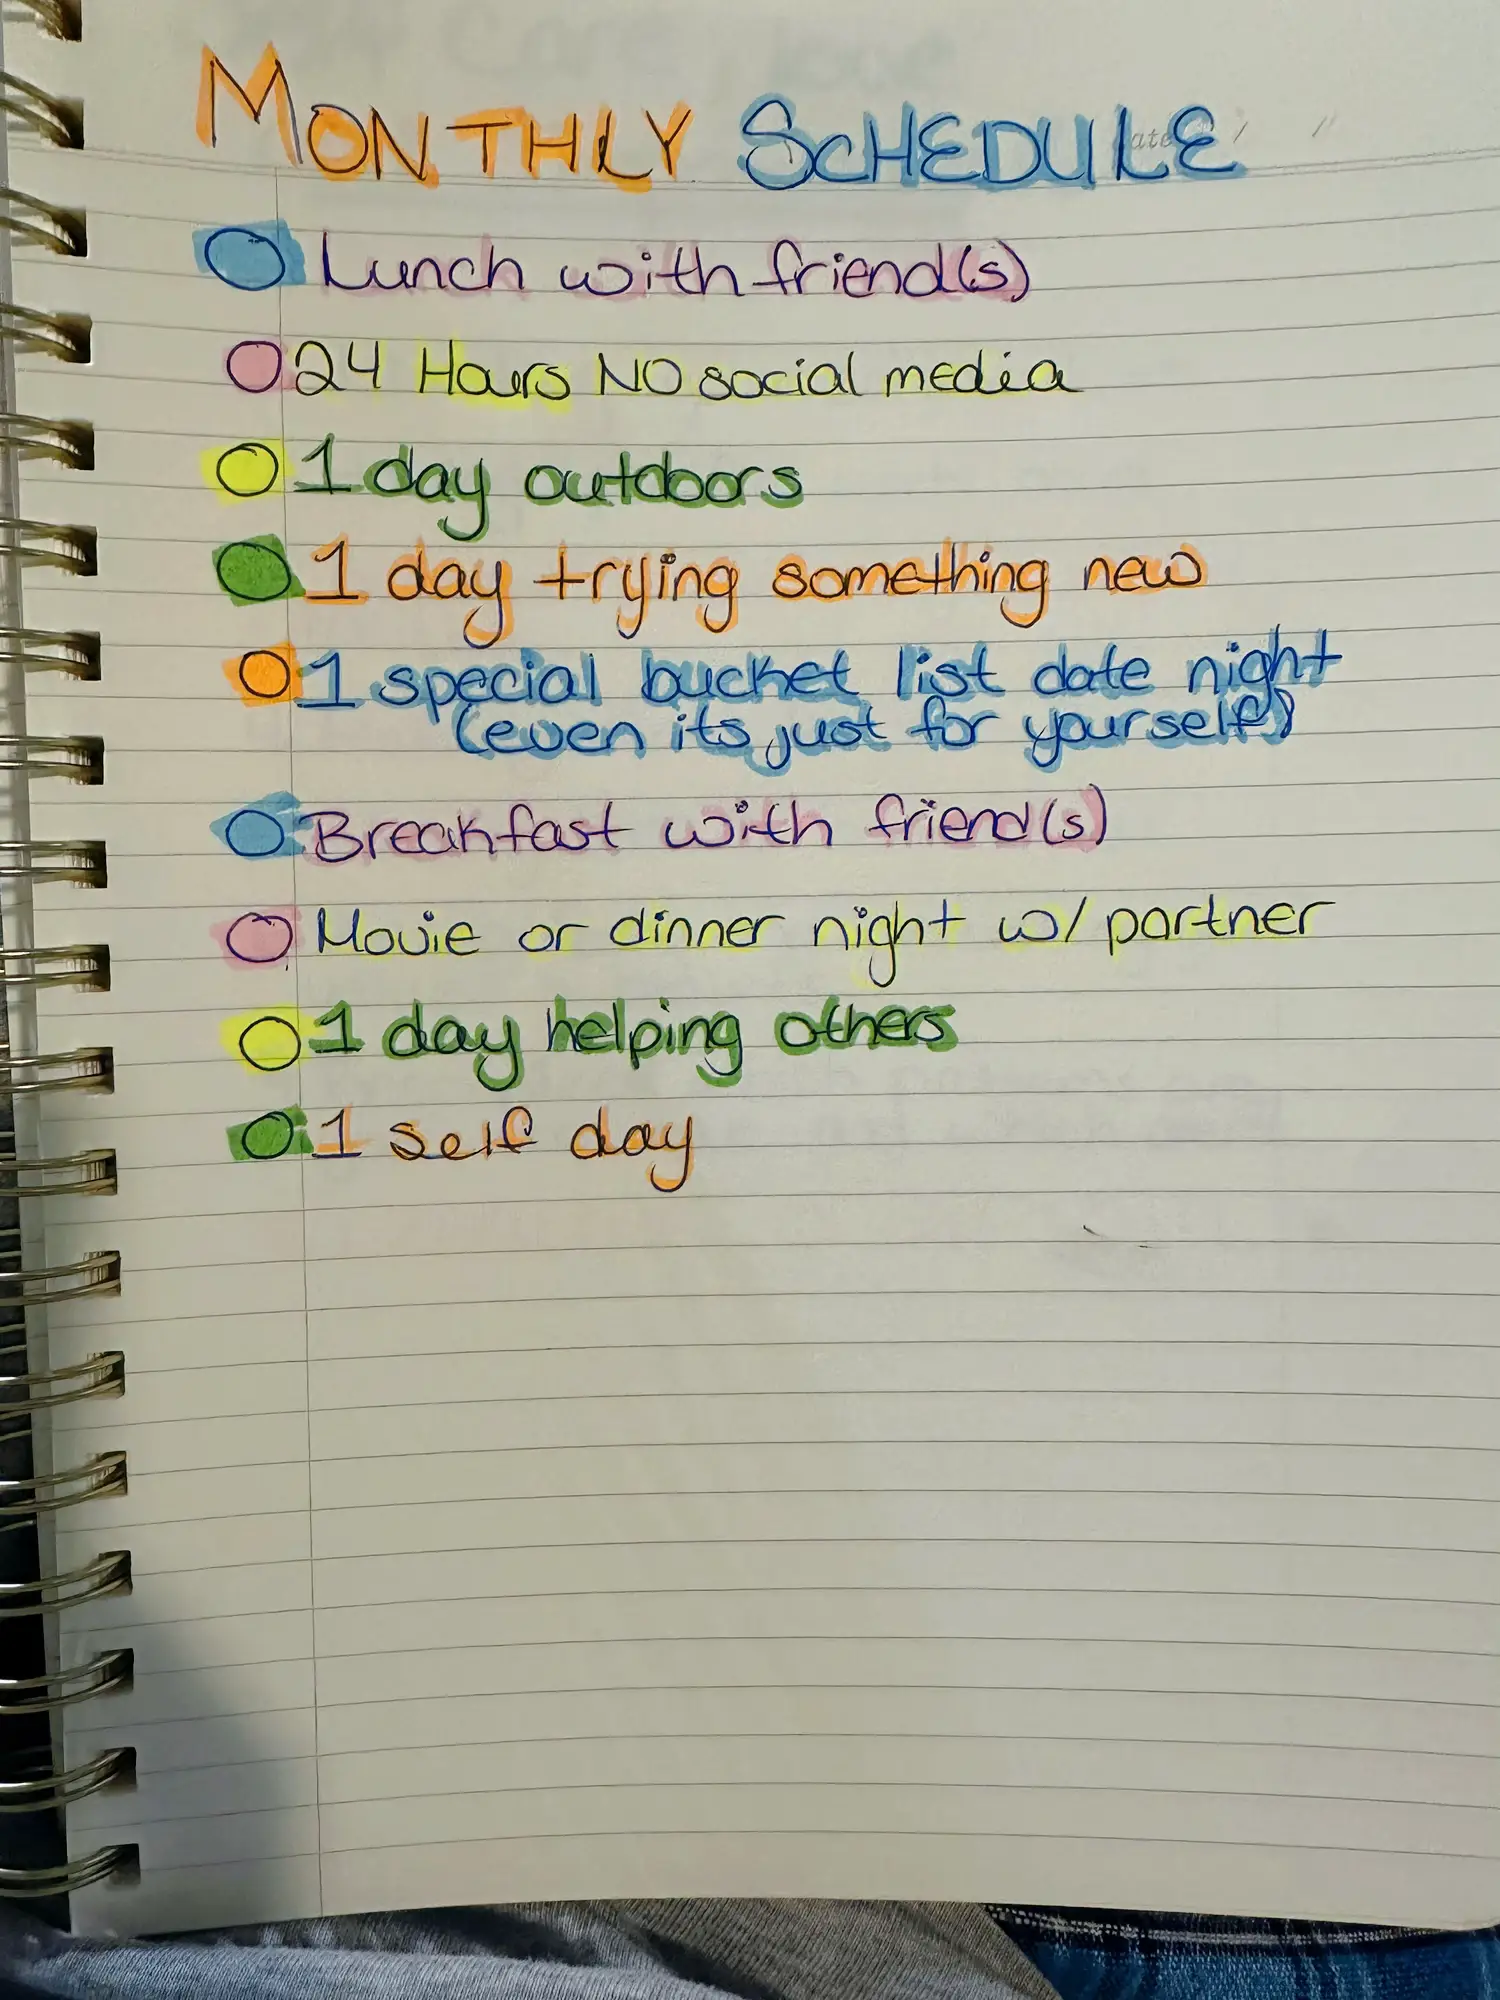  A list of things to do in a month